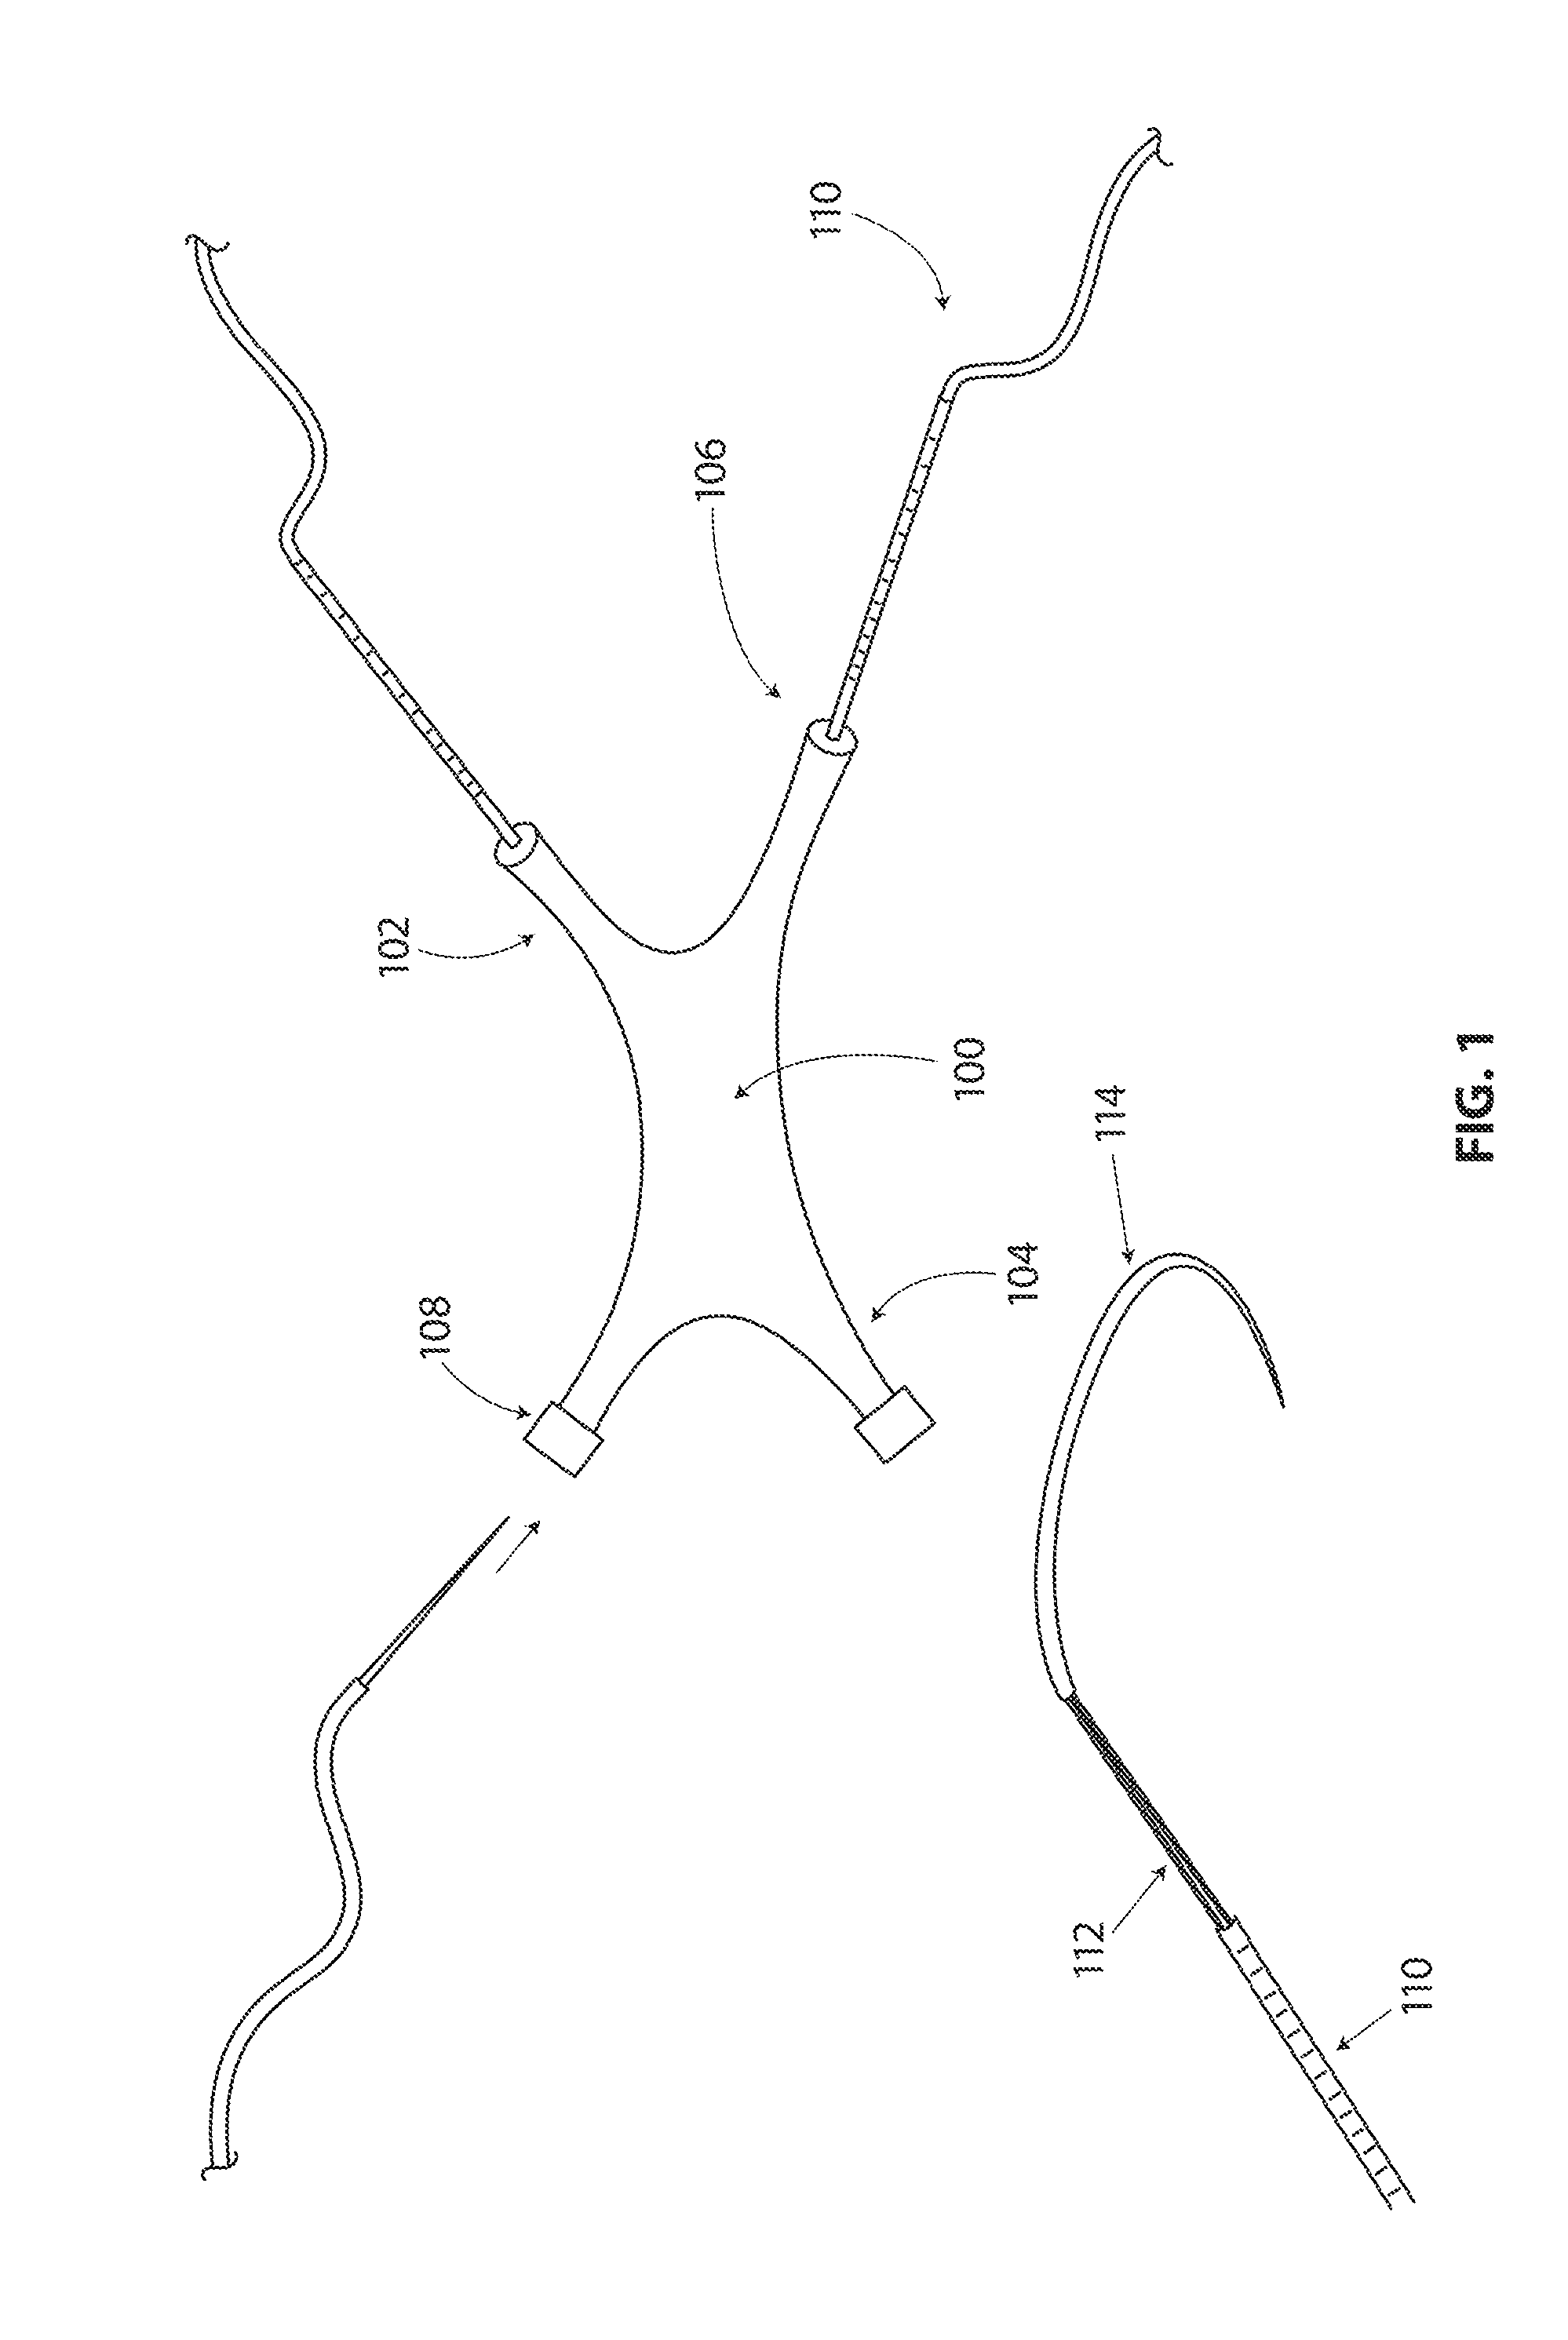 Systems and methods for sternum repair